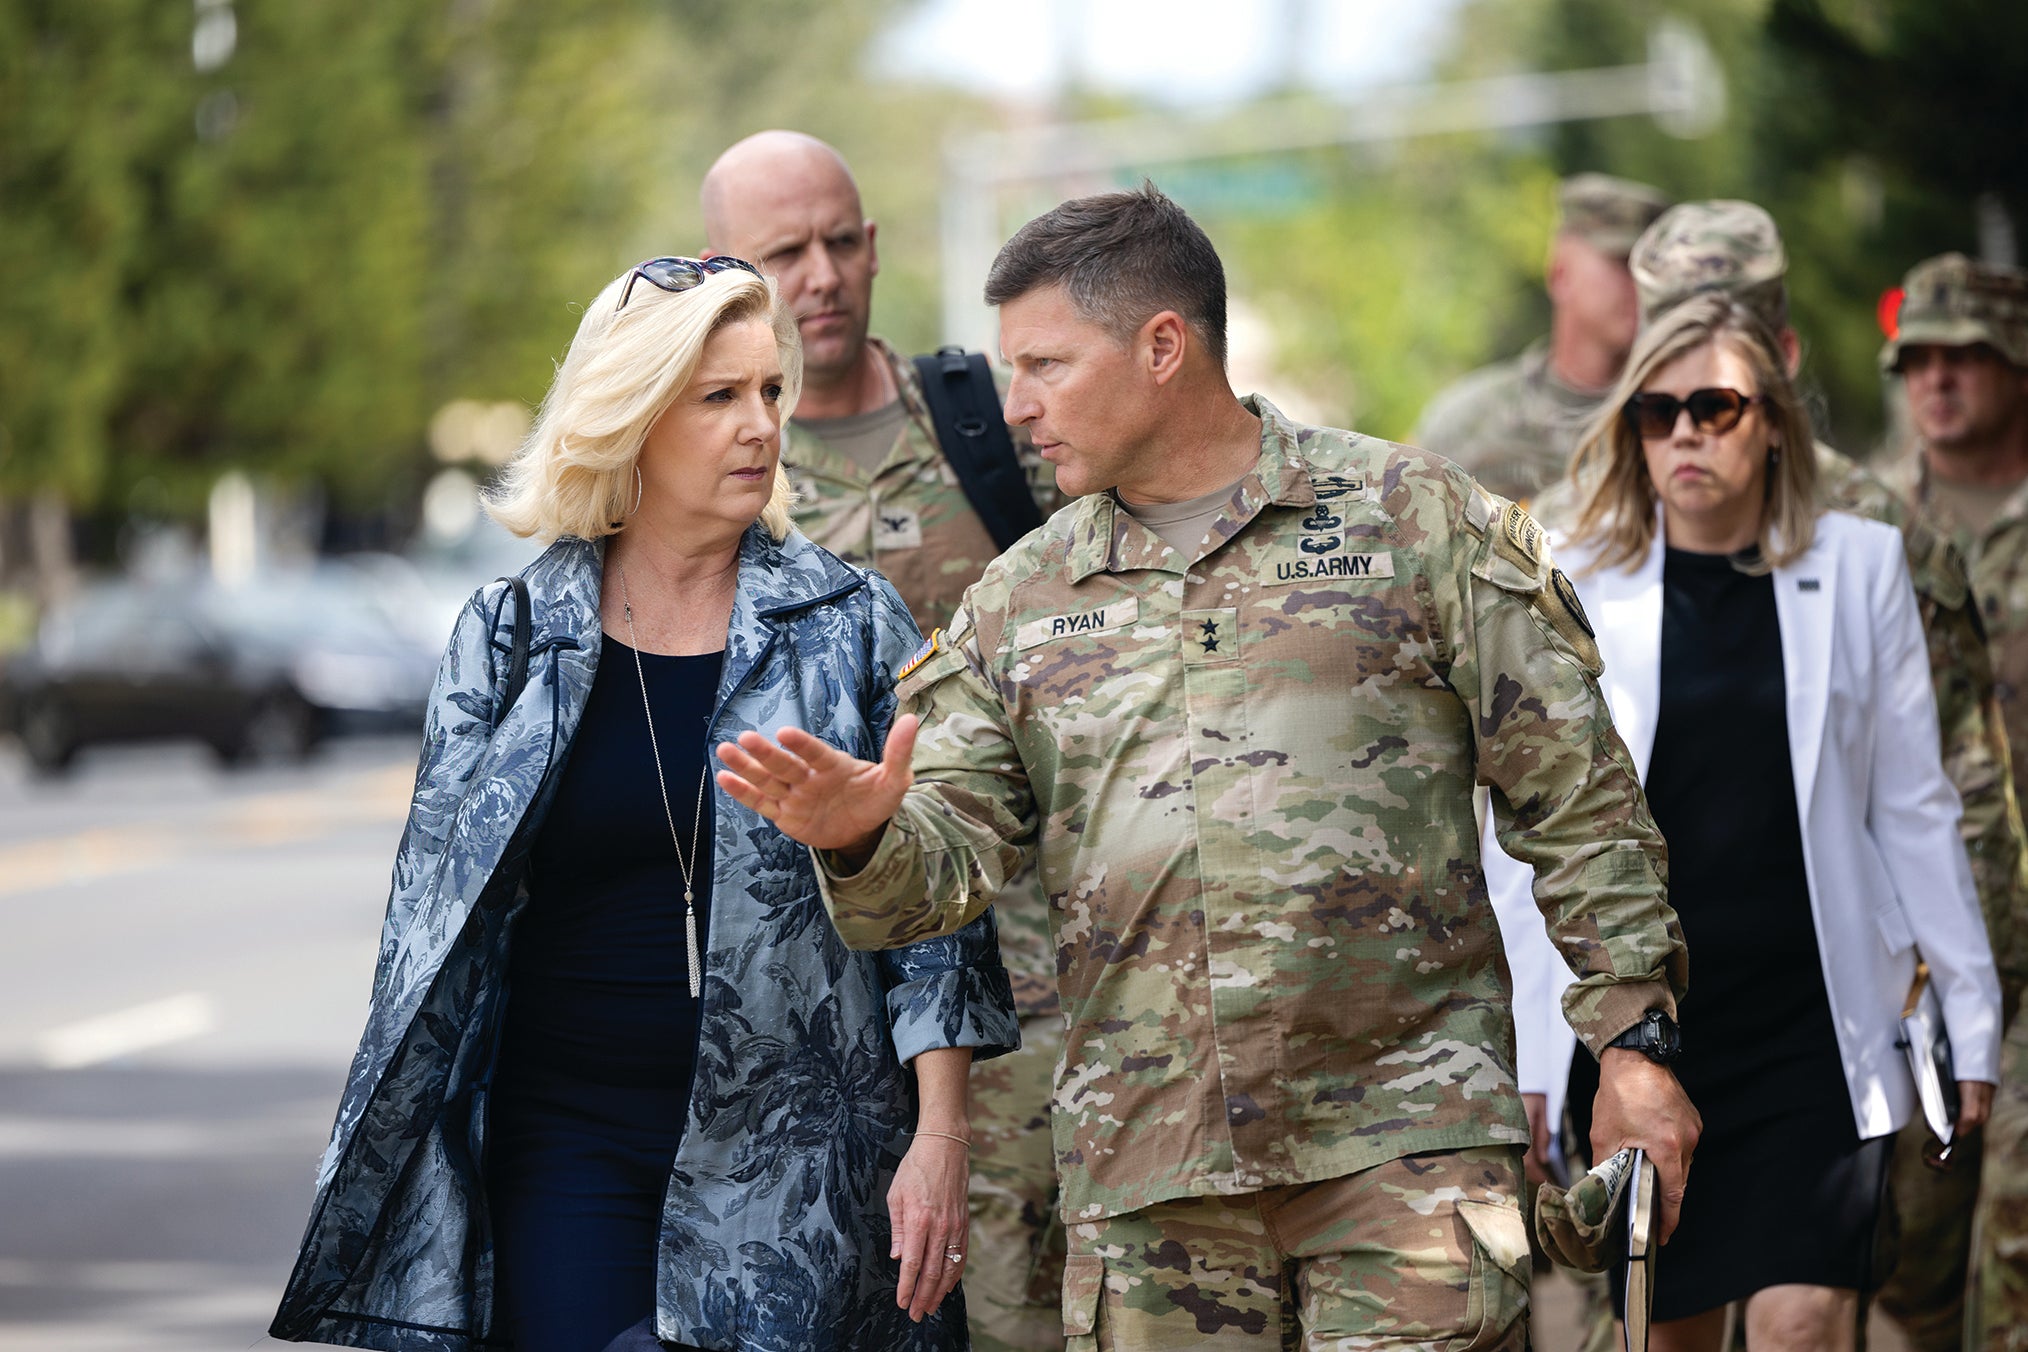 Christine Wormuth, left, the first woman to serve as Army secretary, visits Army facilities in Hawaii. (Credit: U.S. Army/Sgt. Rachel Christensen)